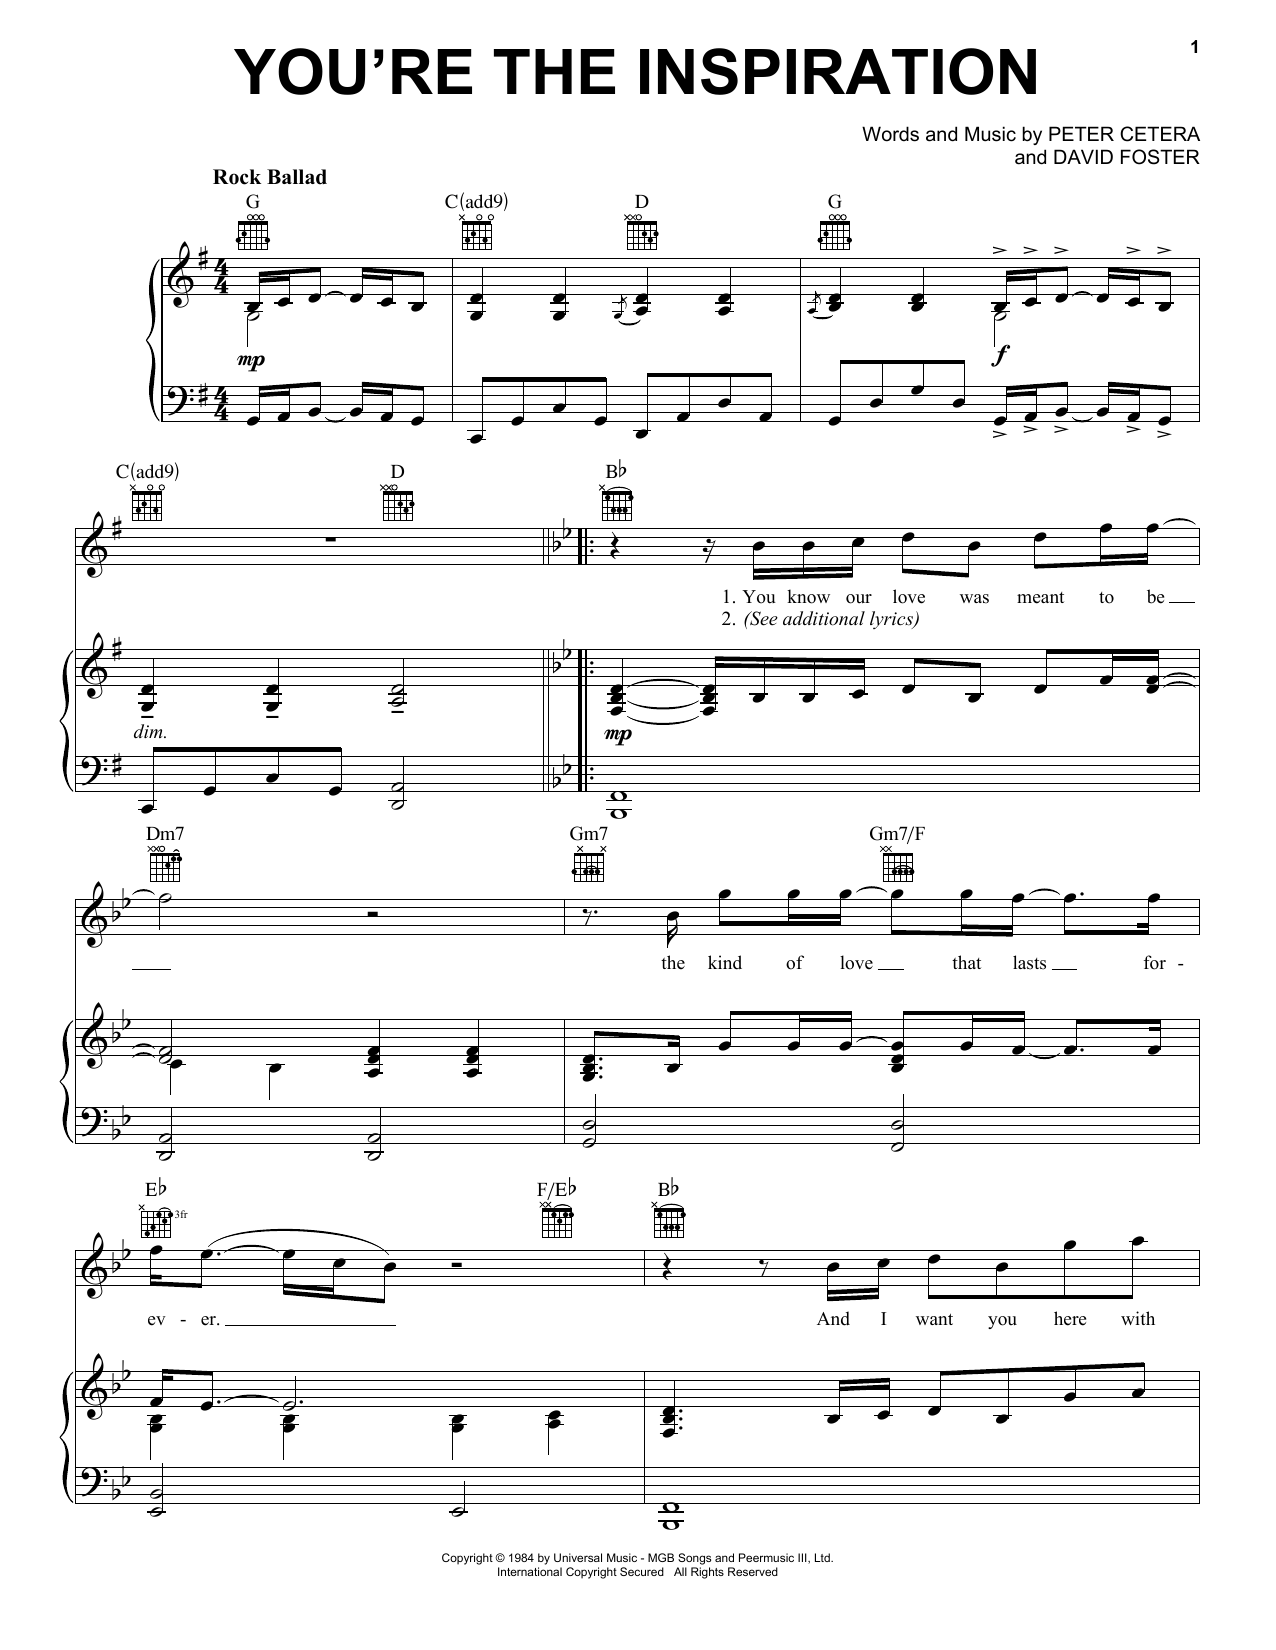 Chicago You're The Inspiration sheet music notes printable PDF score